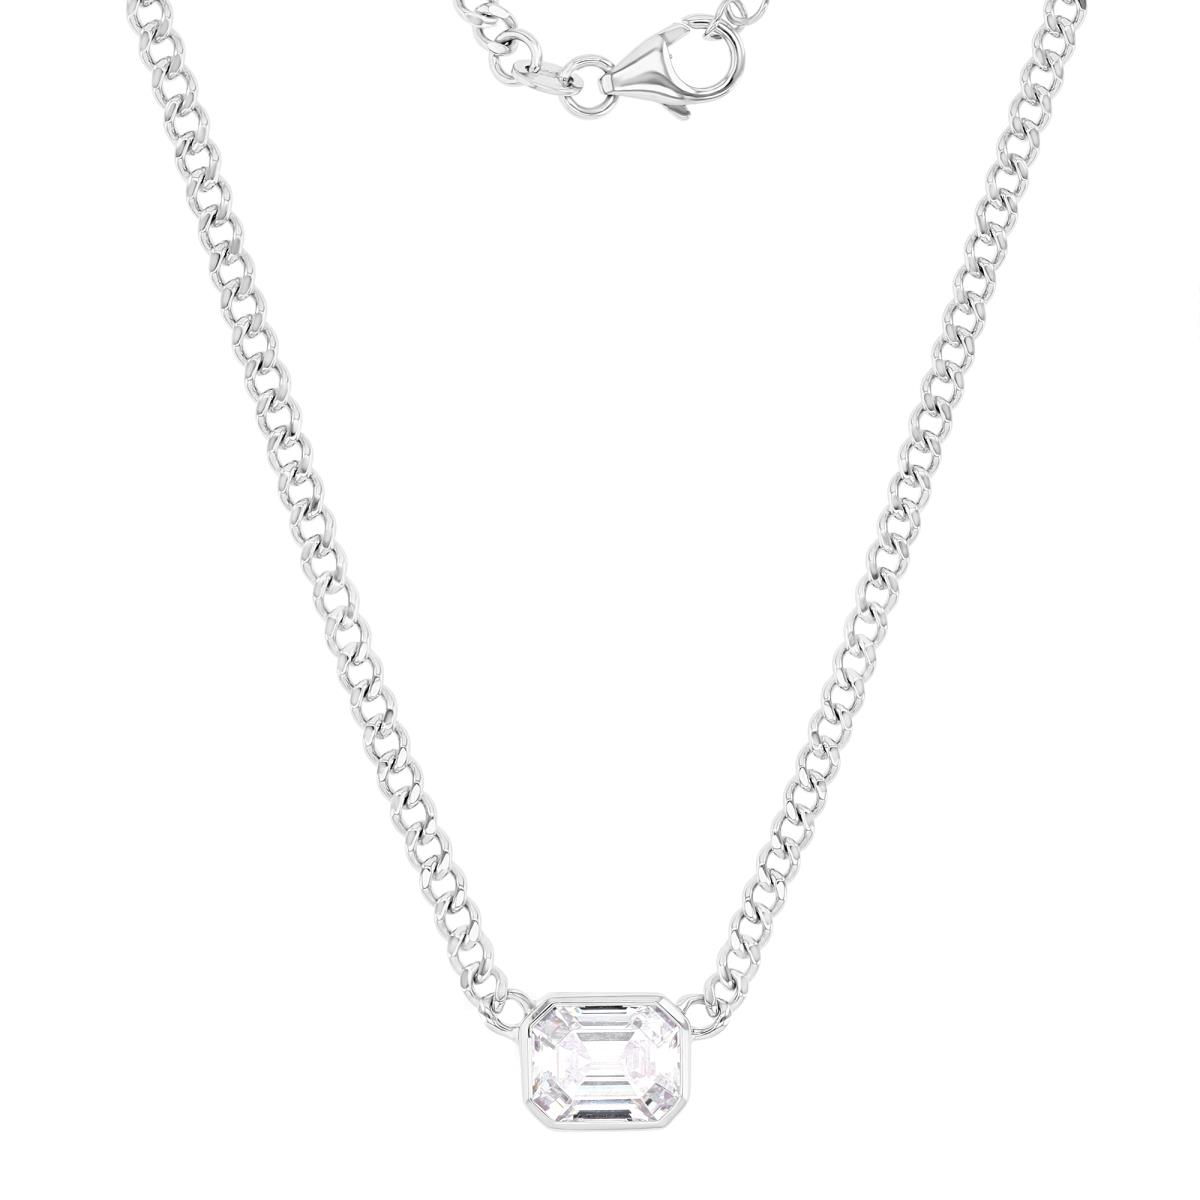 Sterling Silver Rhodium 11X9MM Polished White CZ Emerald Cut Curb Chain 18+2" Necklace